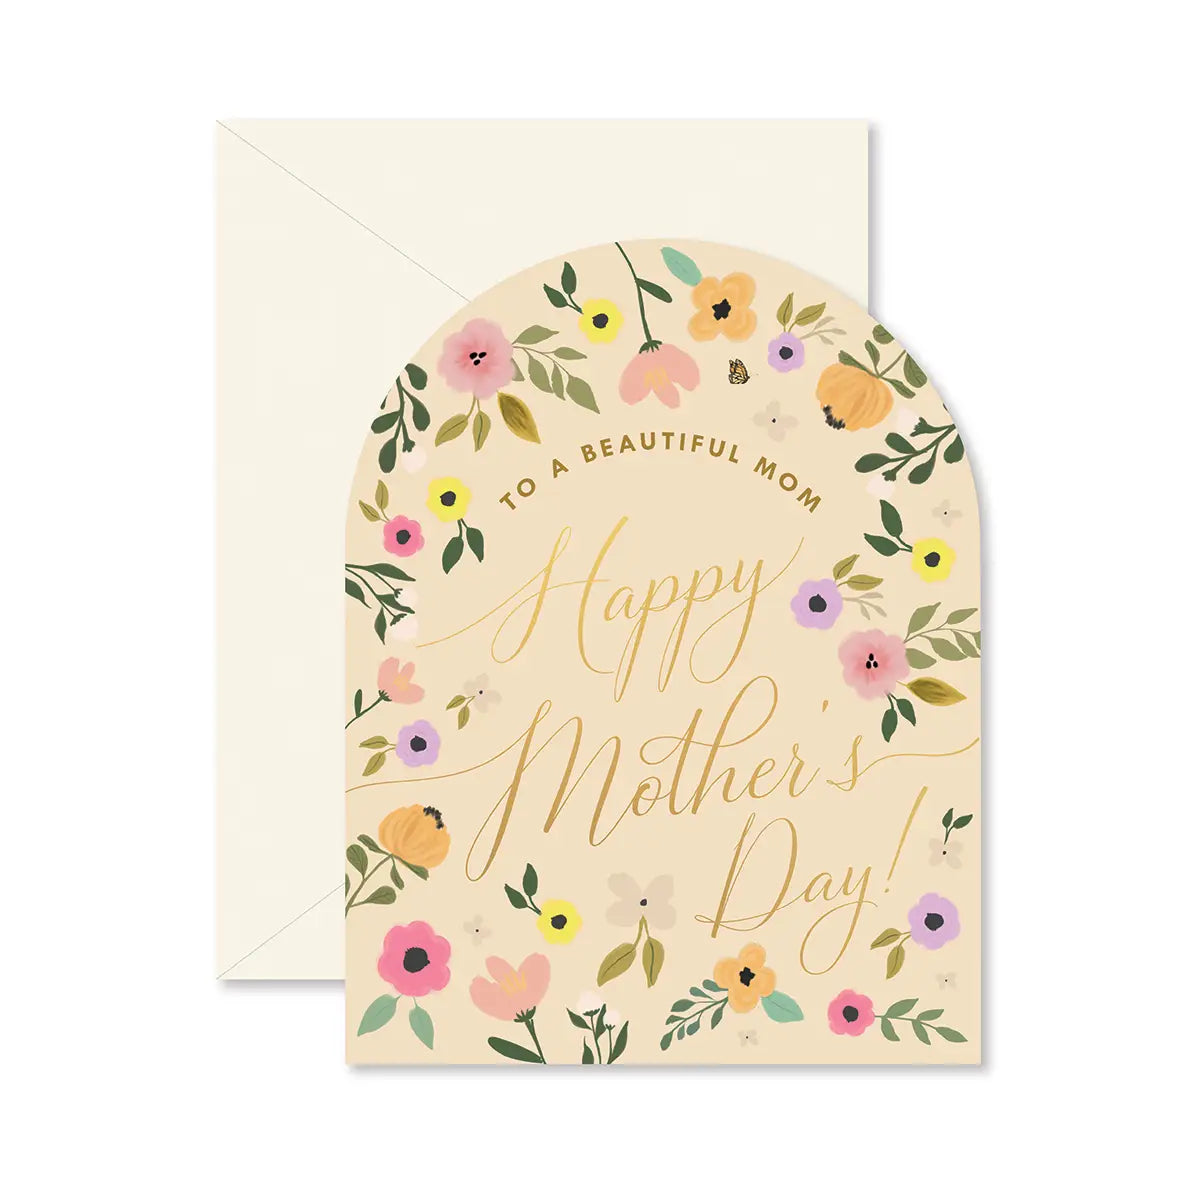 mothers day card with gold foil and floral border arch shape made in the USA by a woman-owned business